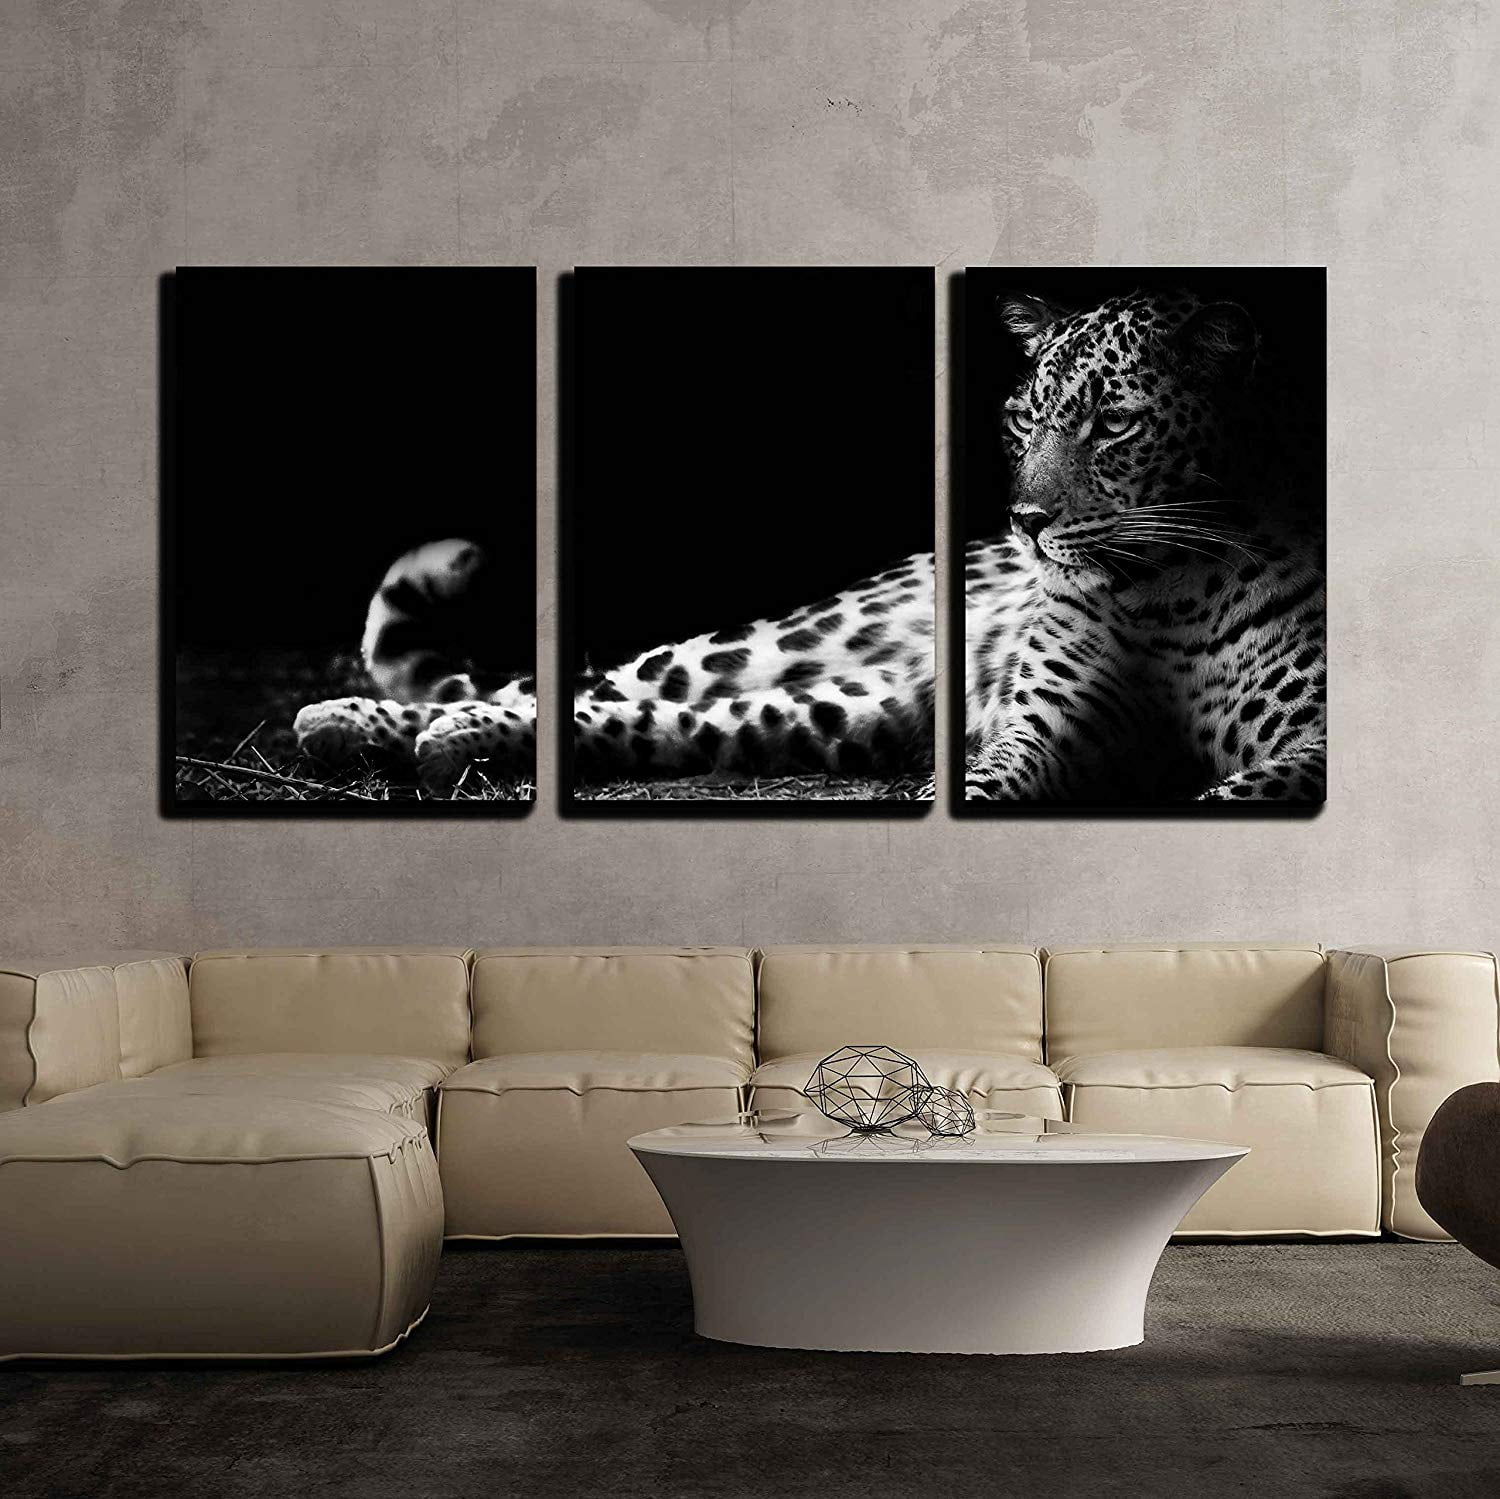 Black and white city scenery series7 HD Canvas Print Home Decor Wall Art Picture 